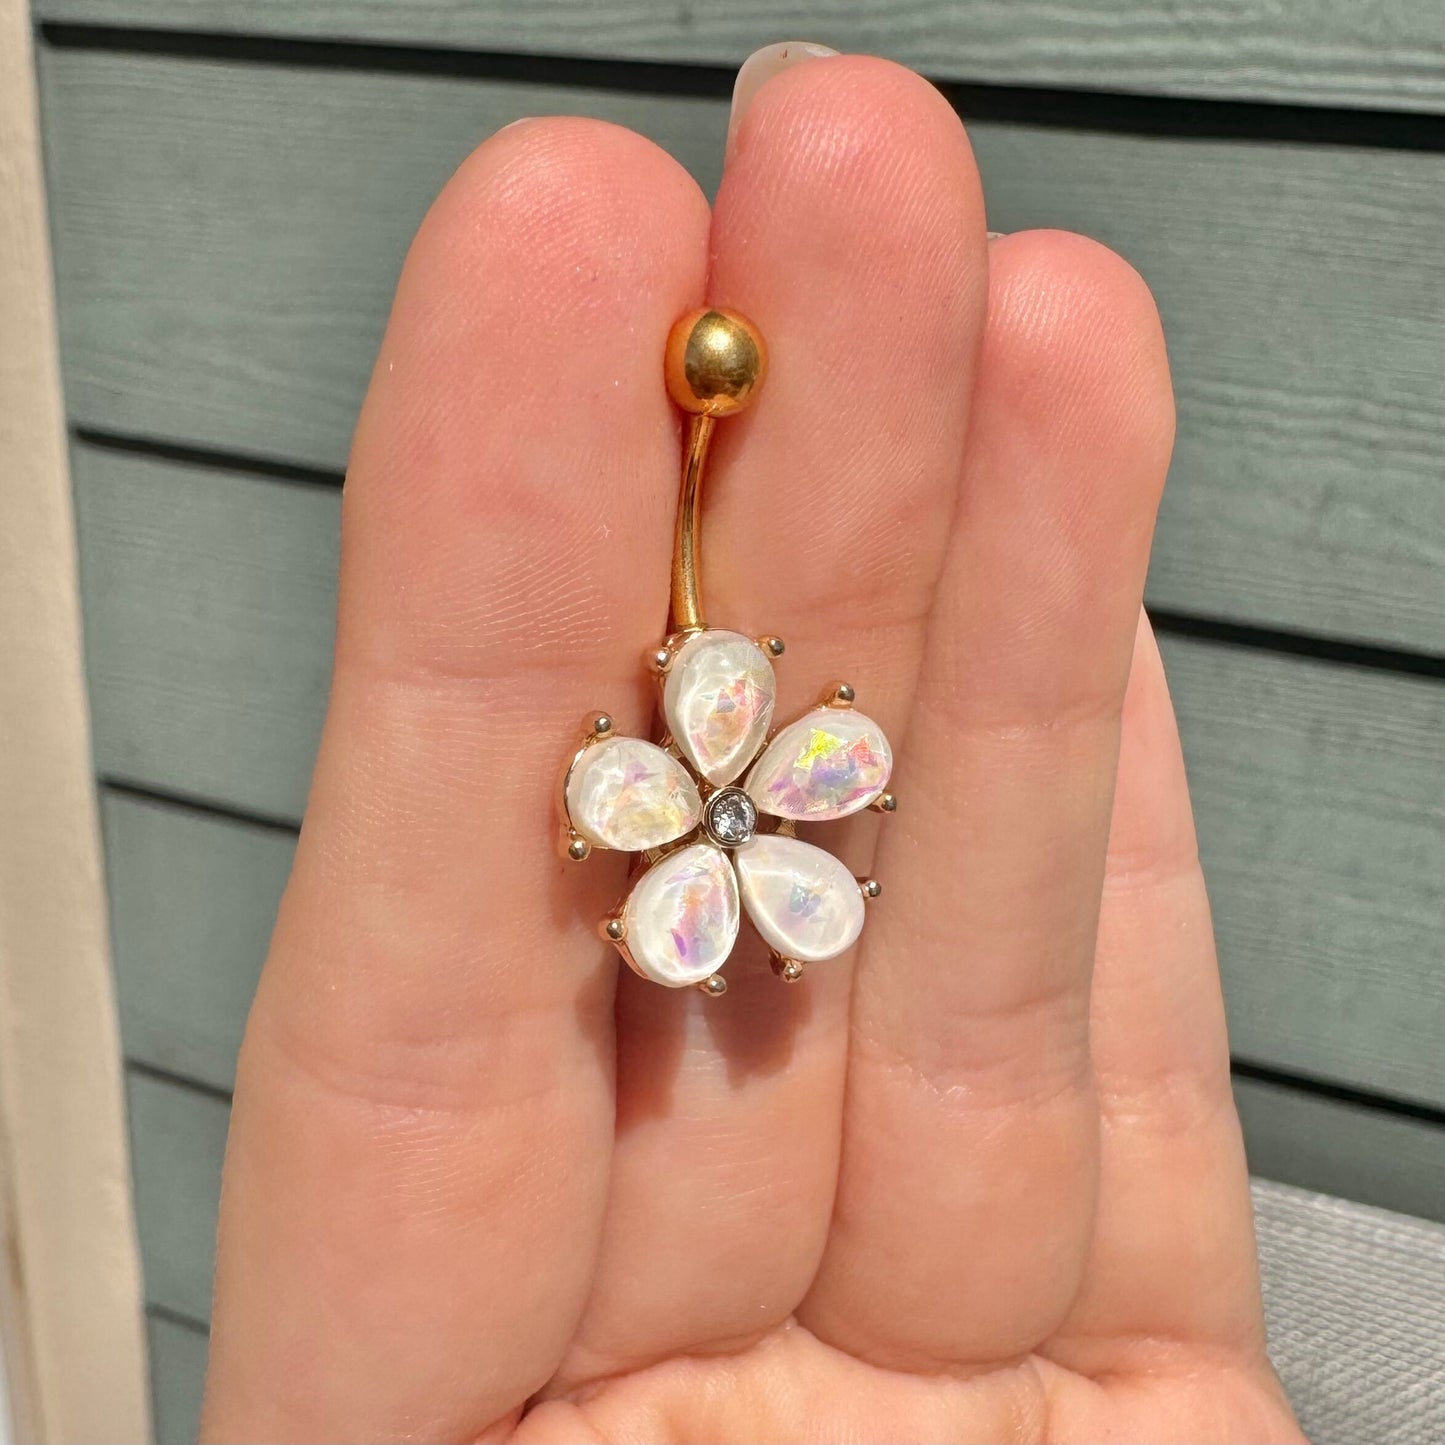 Silver Hibiscus Flower Belly Button Ring (14G, 10mm, Surgical Steel, Silver, Gold or Rose Gold)